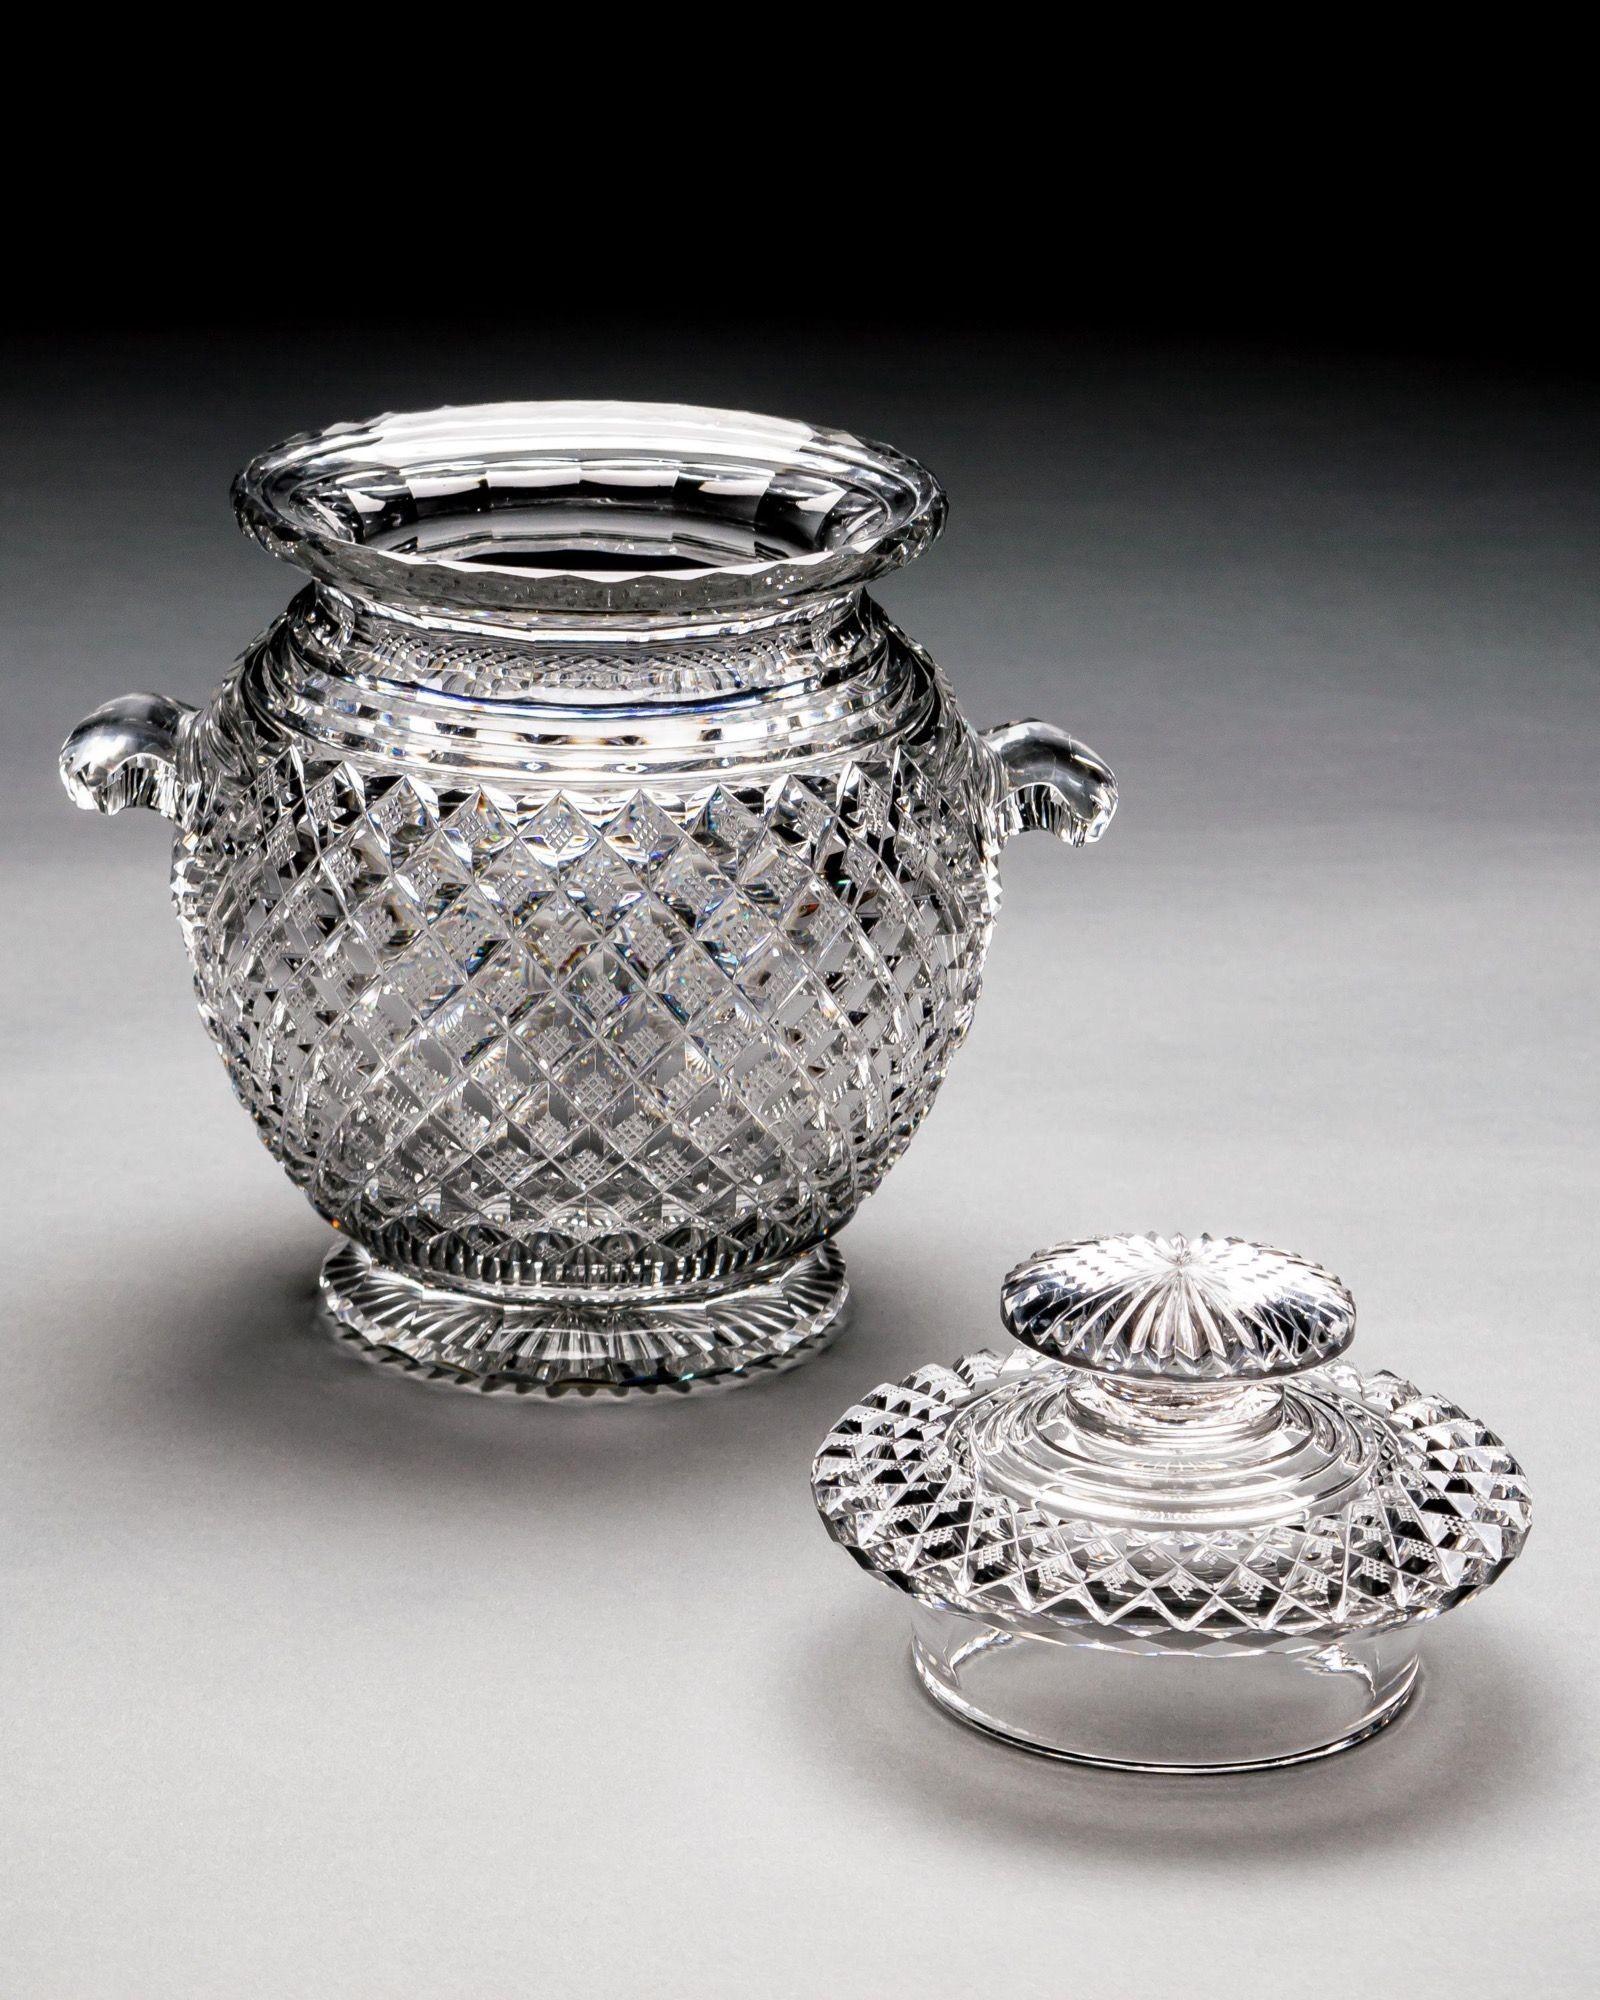 19th Century An Exceptional Pair of Regency Cut Glass Ice Buckets For Sale